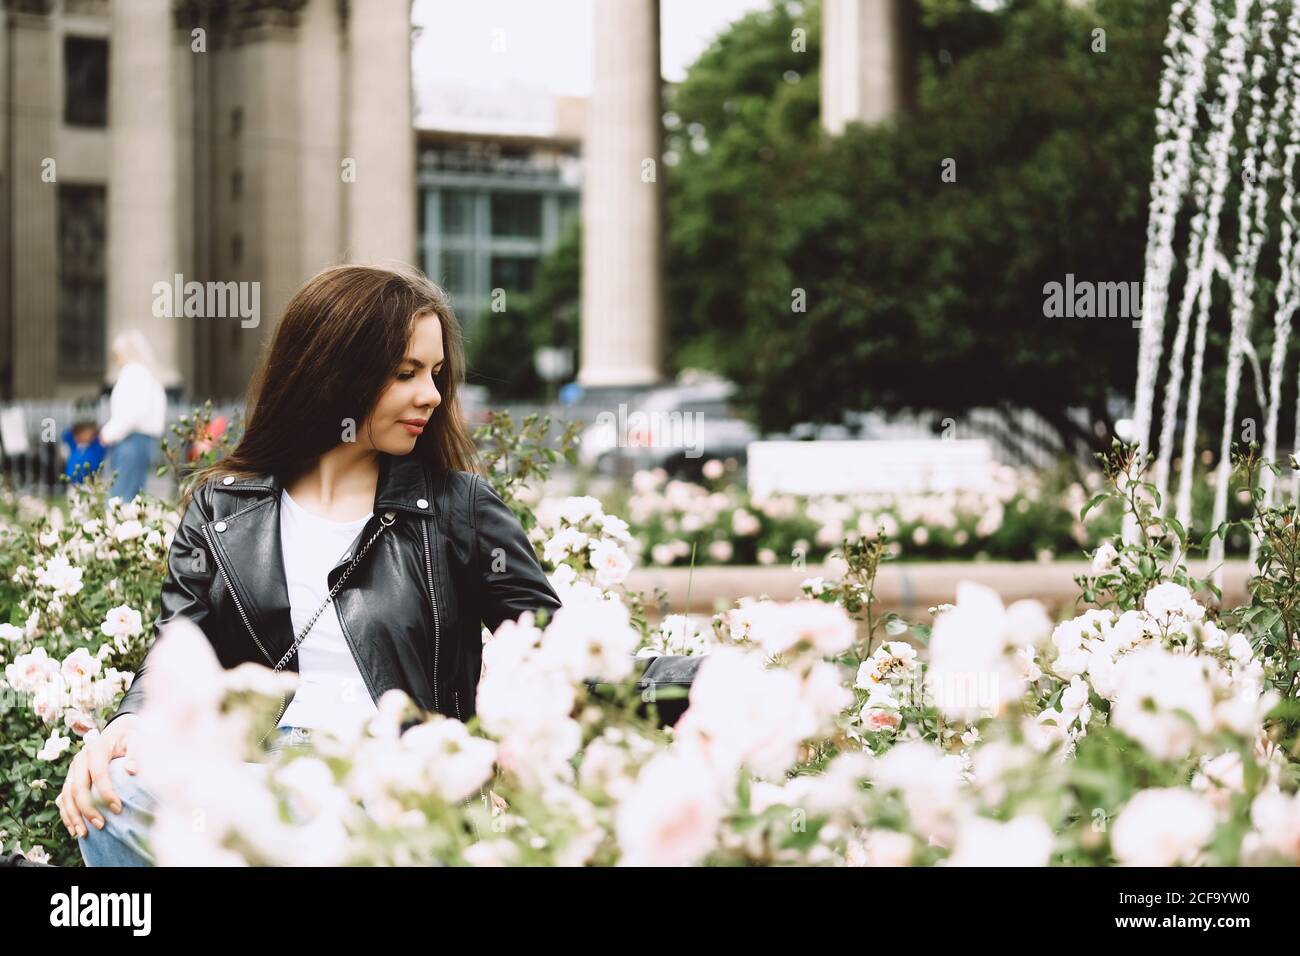 Young woman with long hair in the street of a big city surrounded by roses. Saint Petersburg, Russia. Stock Photo